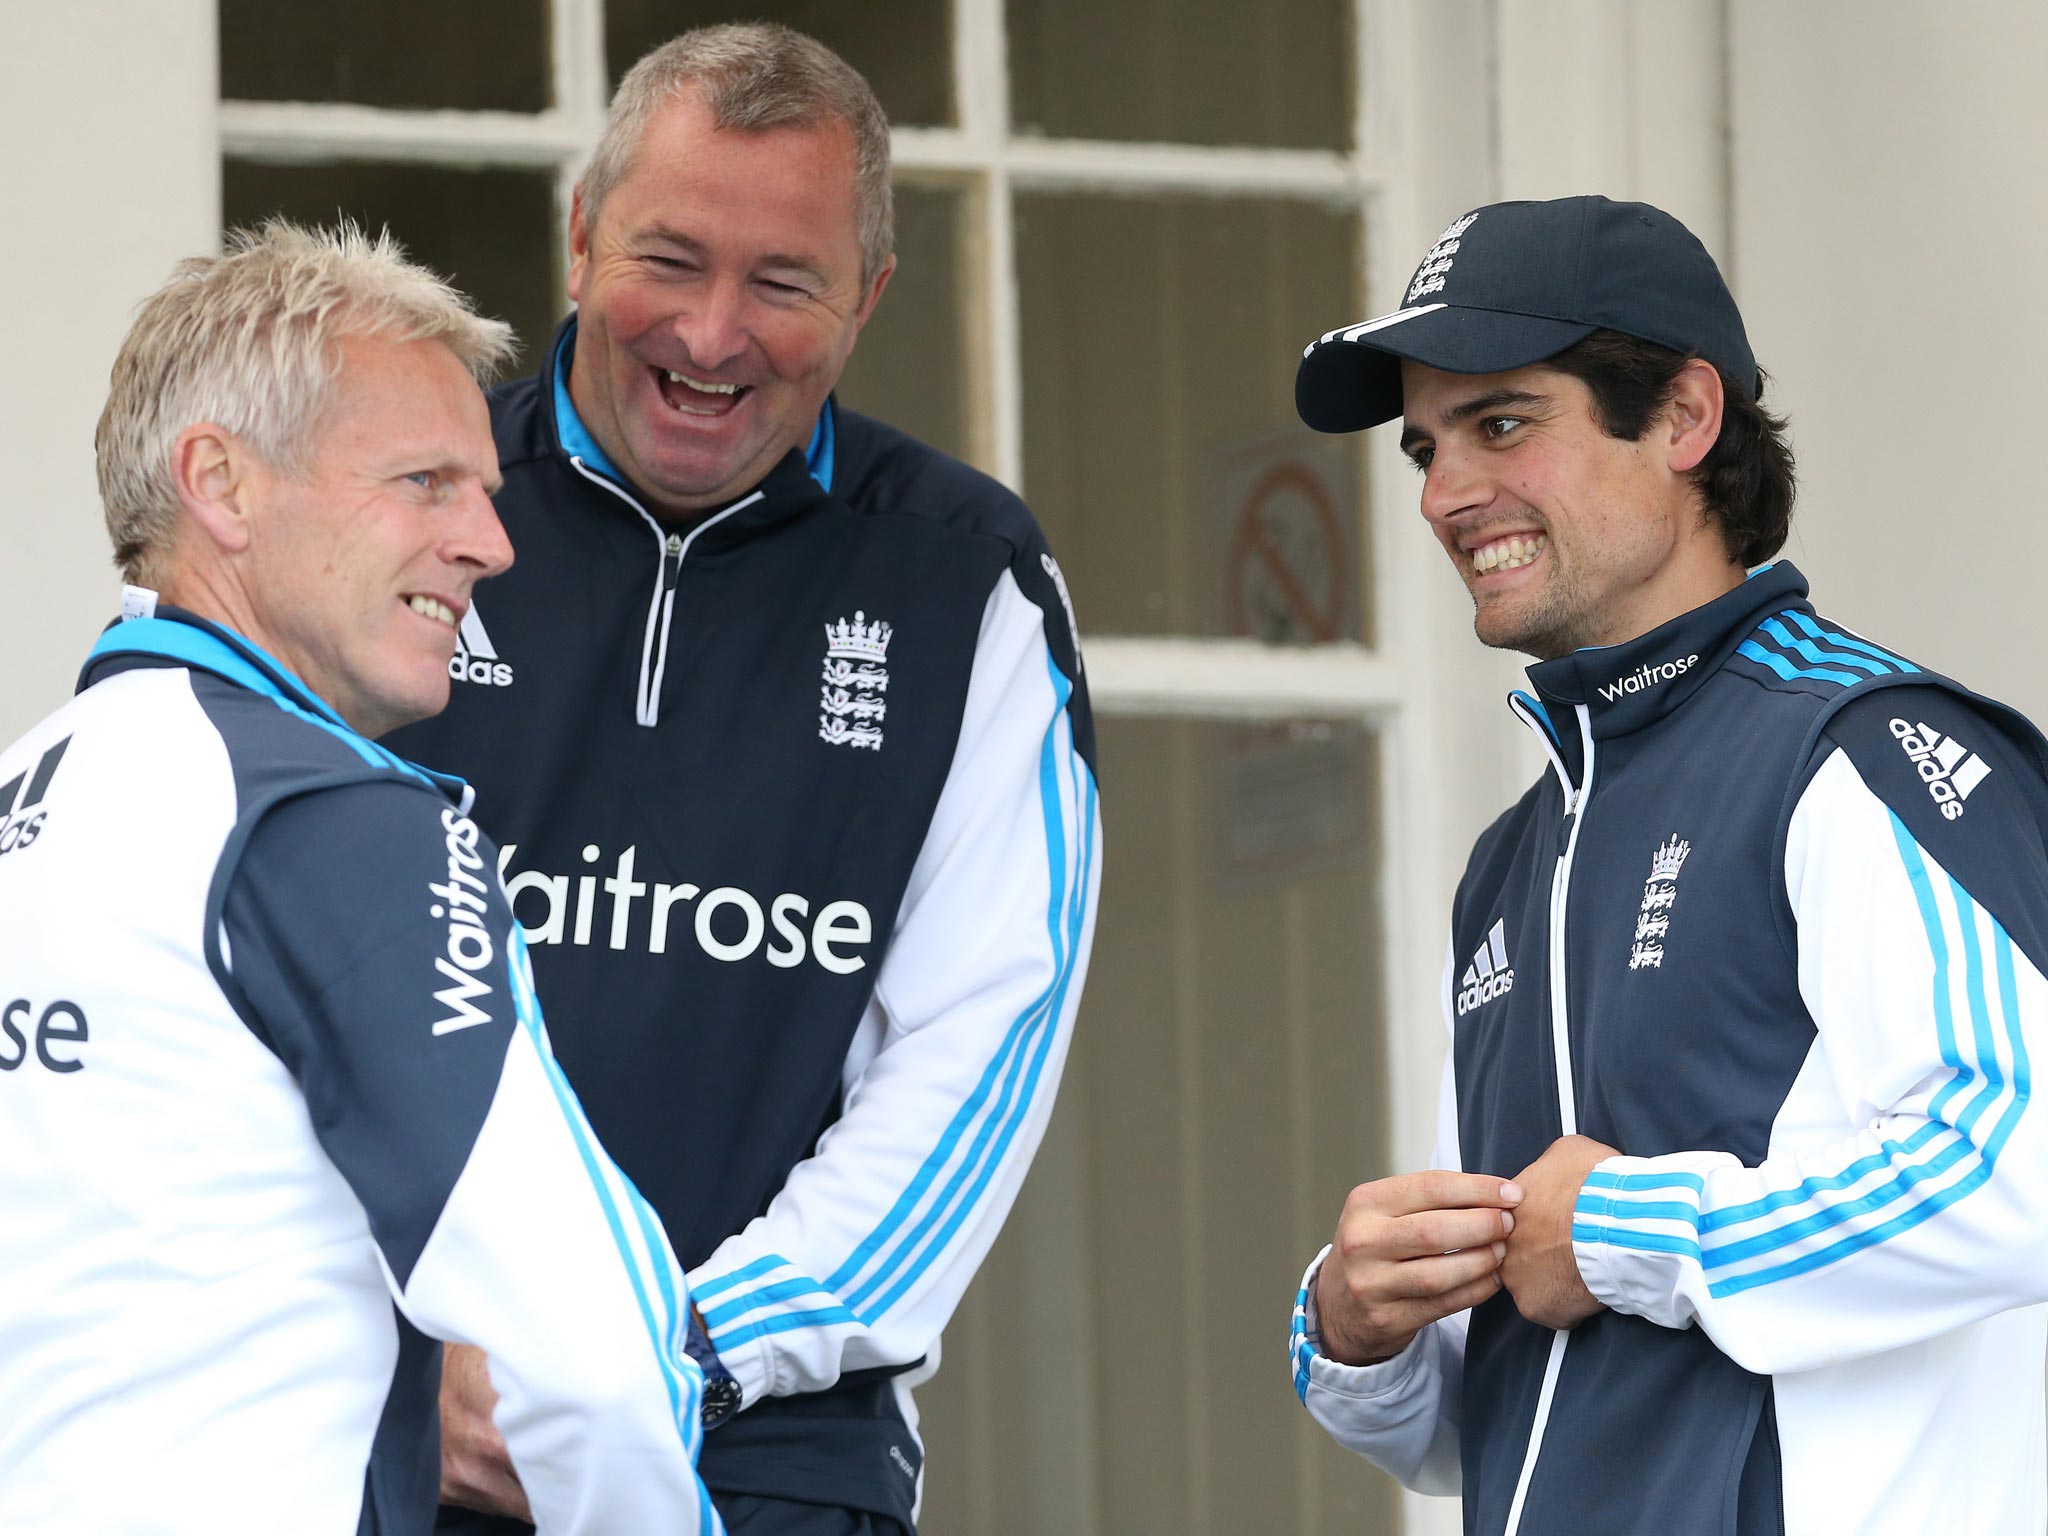 England coaches Peter Moores (L) and Paul Farbrace (C) stand with England captain Alastair Cook as they wait for conditions to improve during the One Day International against Scotland